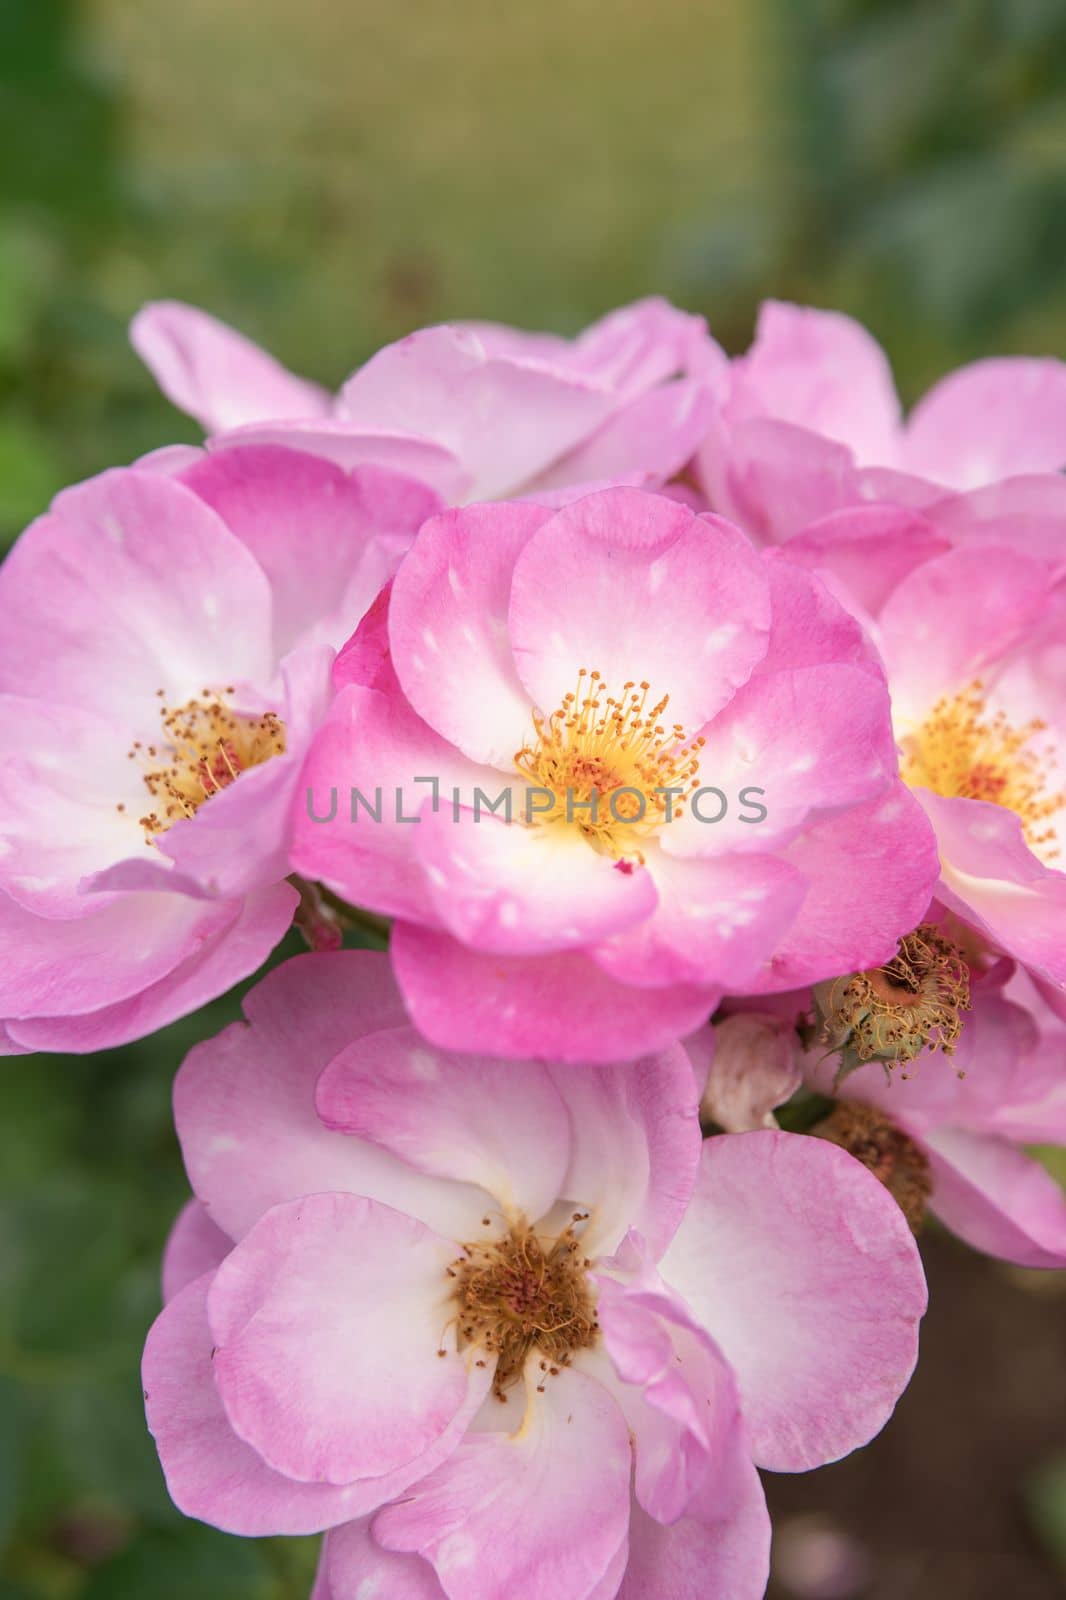 harkness rosa. Rose with small pink flat flowers with glow from the sunset by SERSOL